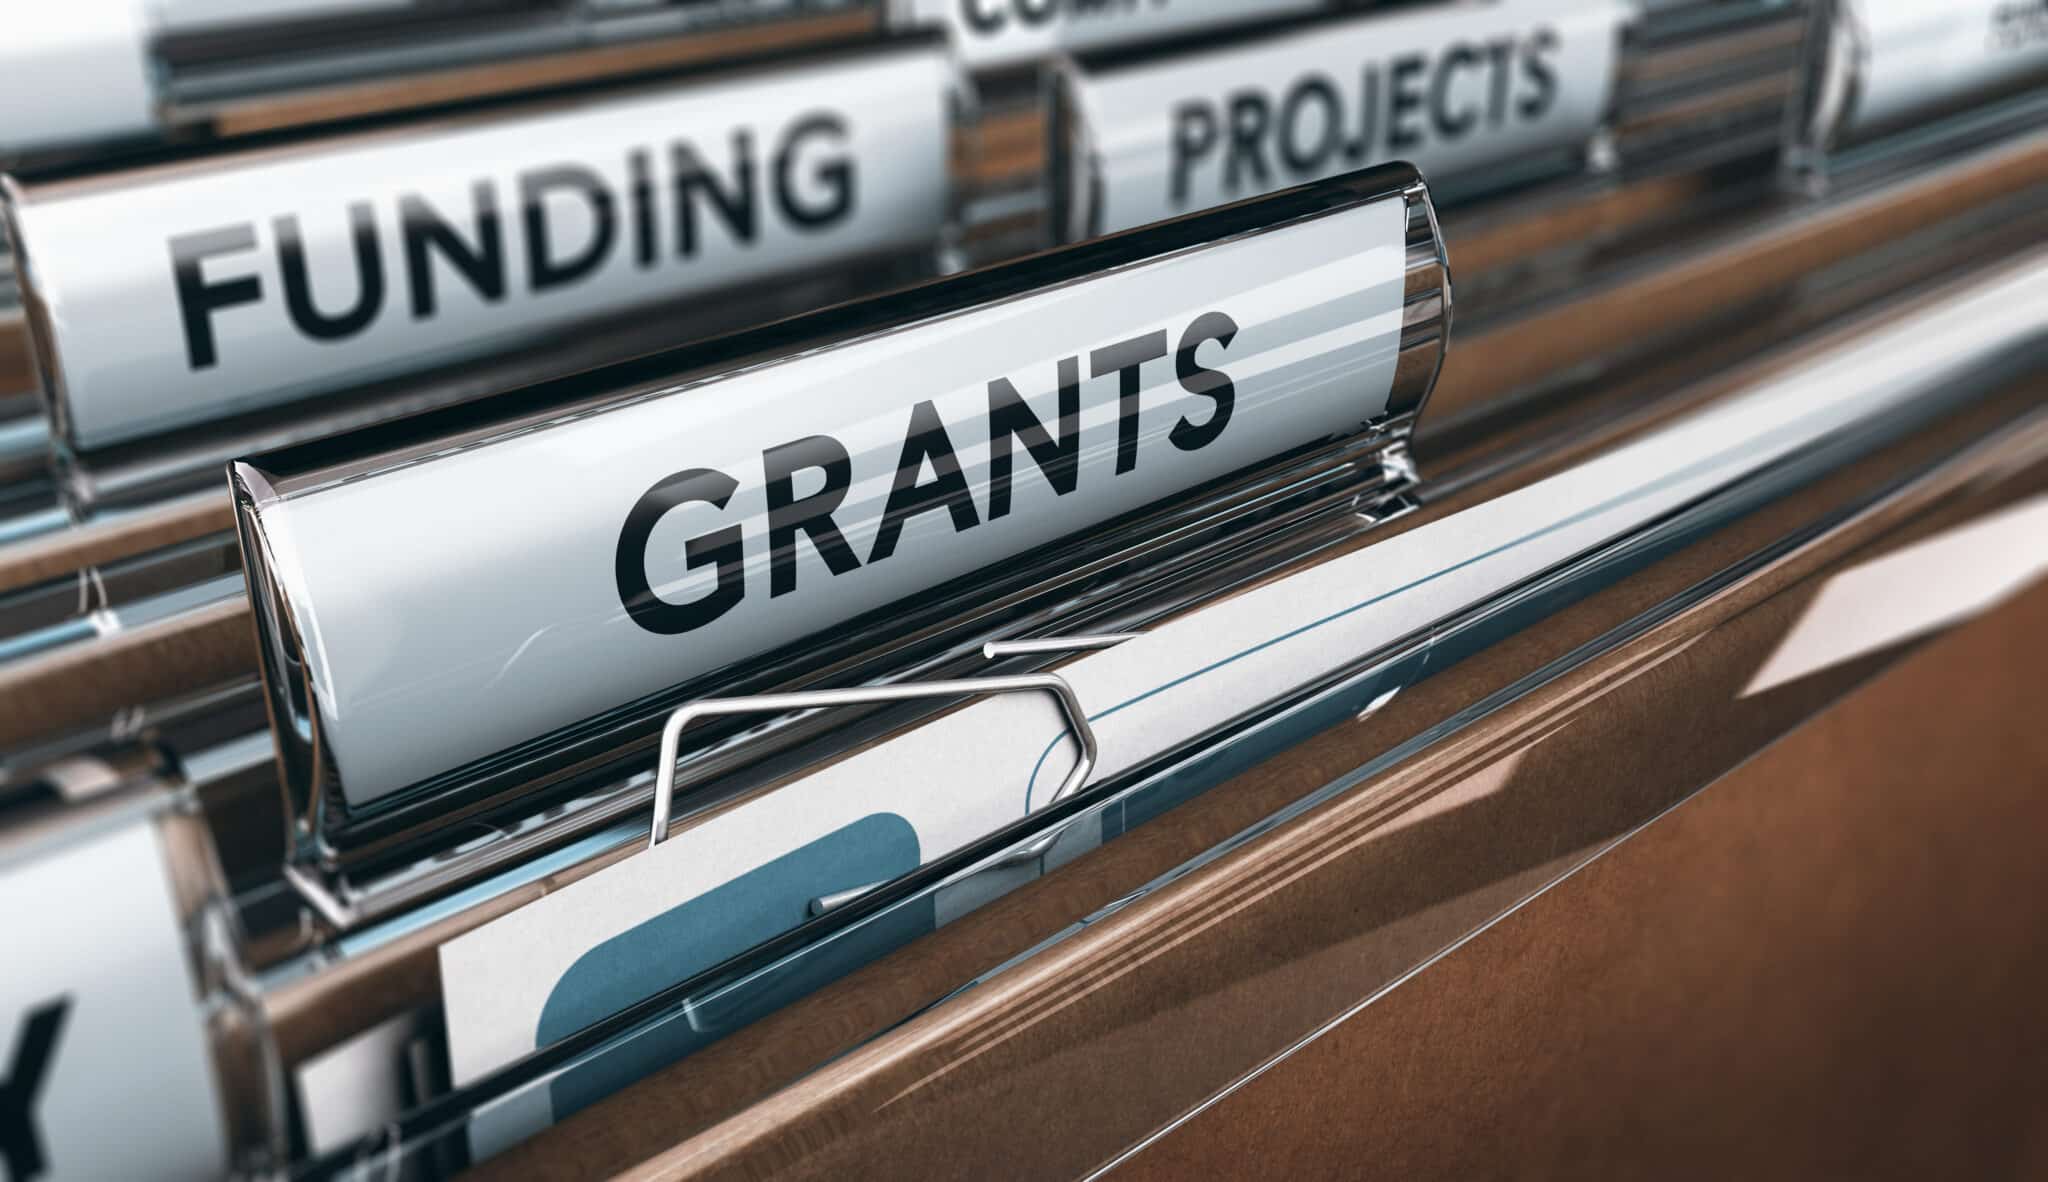 Explore the synergy between research grants and outsourced transcription. Learn how budgeting for services like Trans|IT can maximize your grant's impact.